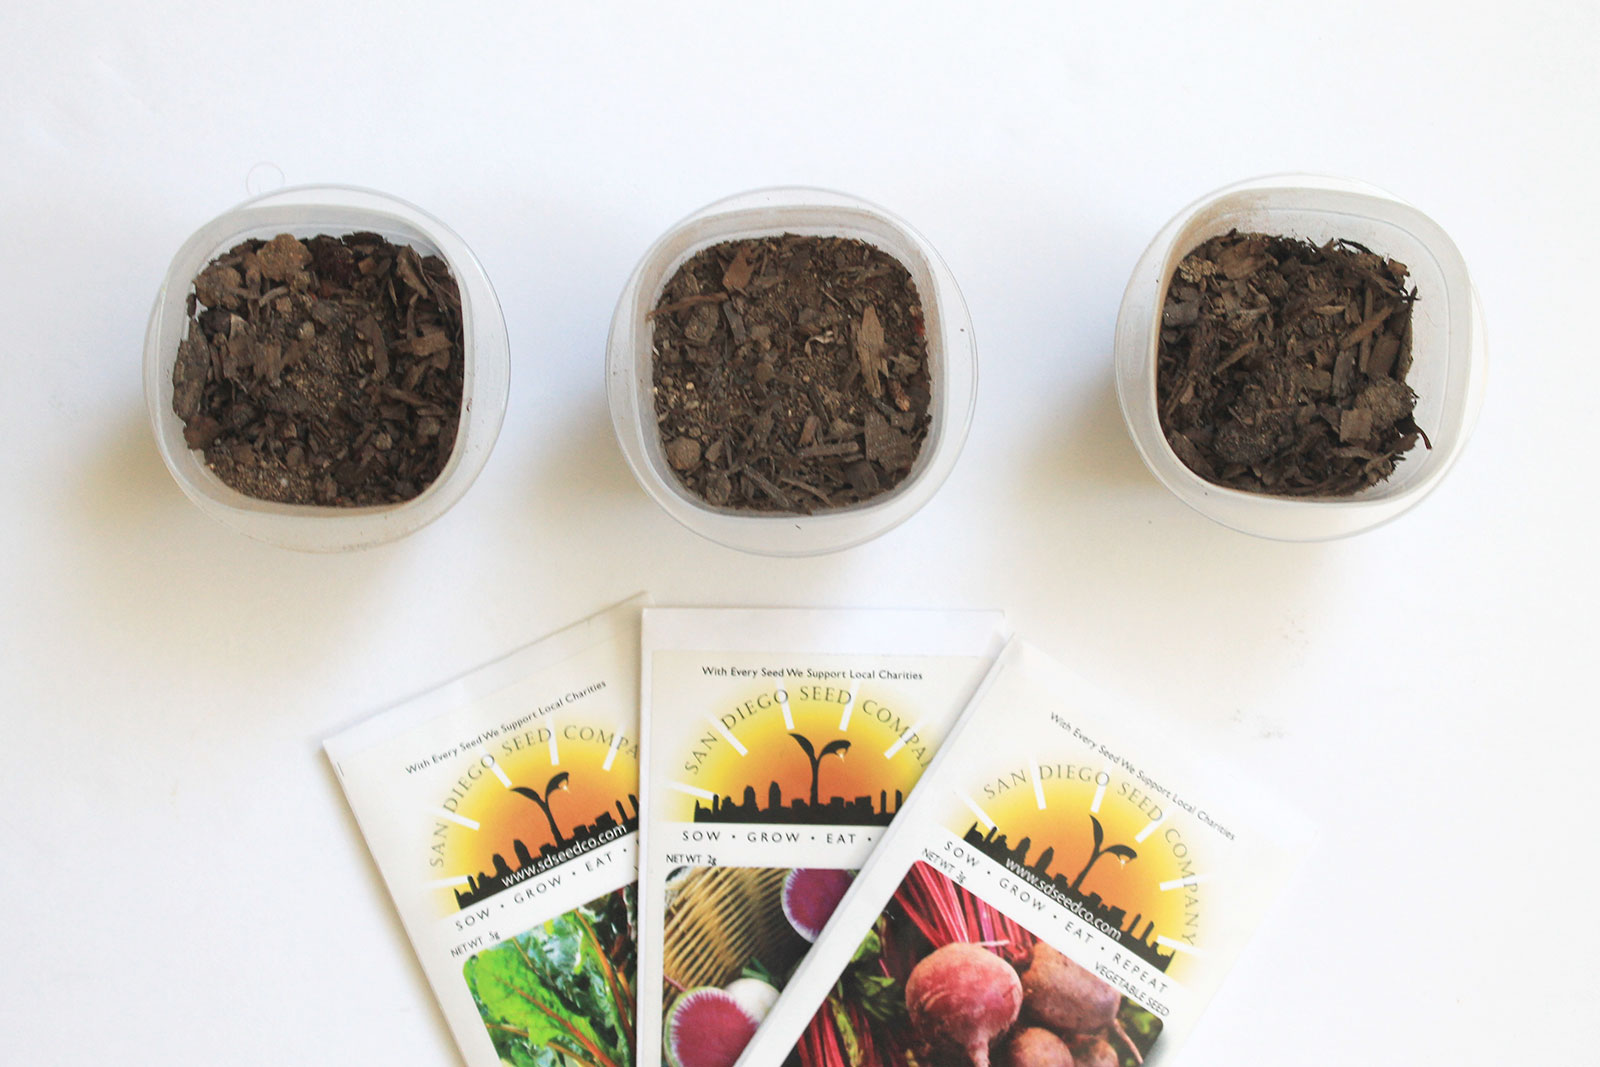 Repurpose plastic containers to store seed starters